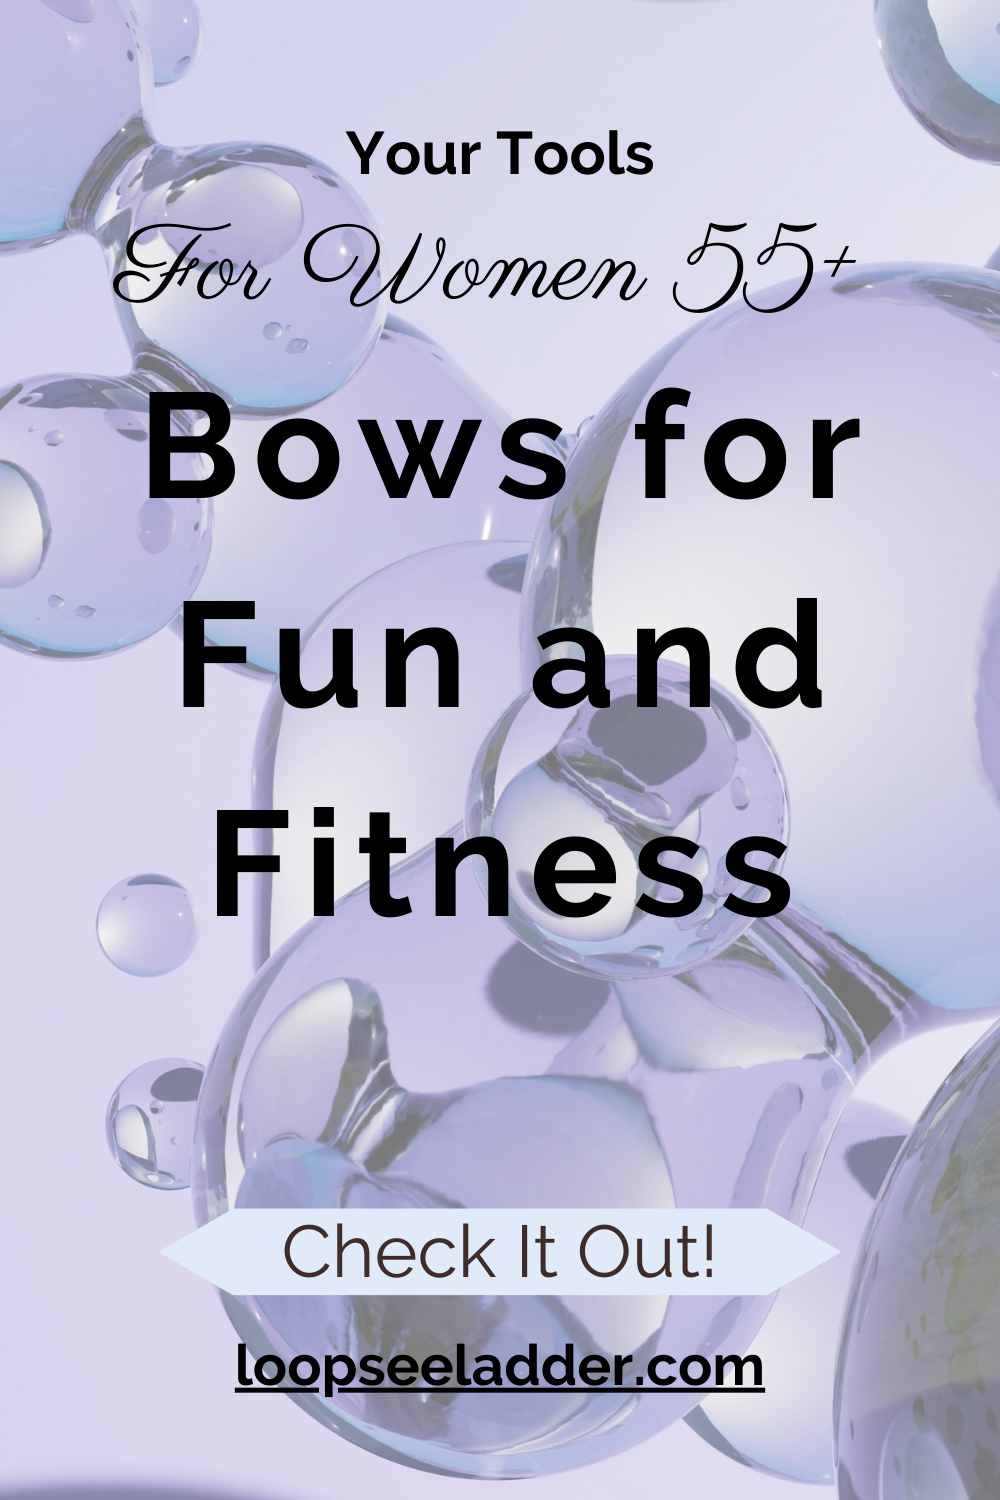 The Bows Revolution: Unleashing Fun and Fitness for Women 55+